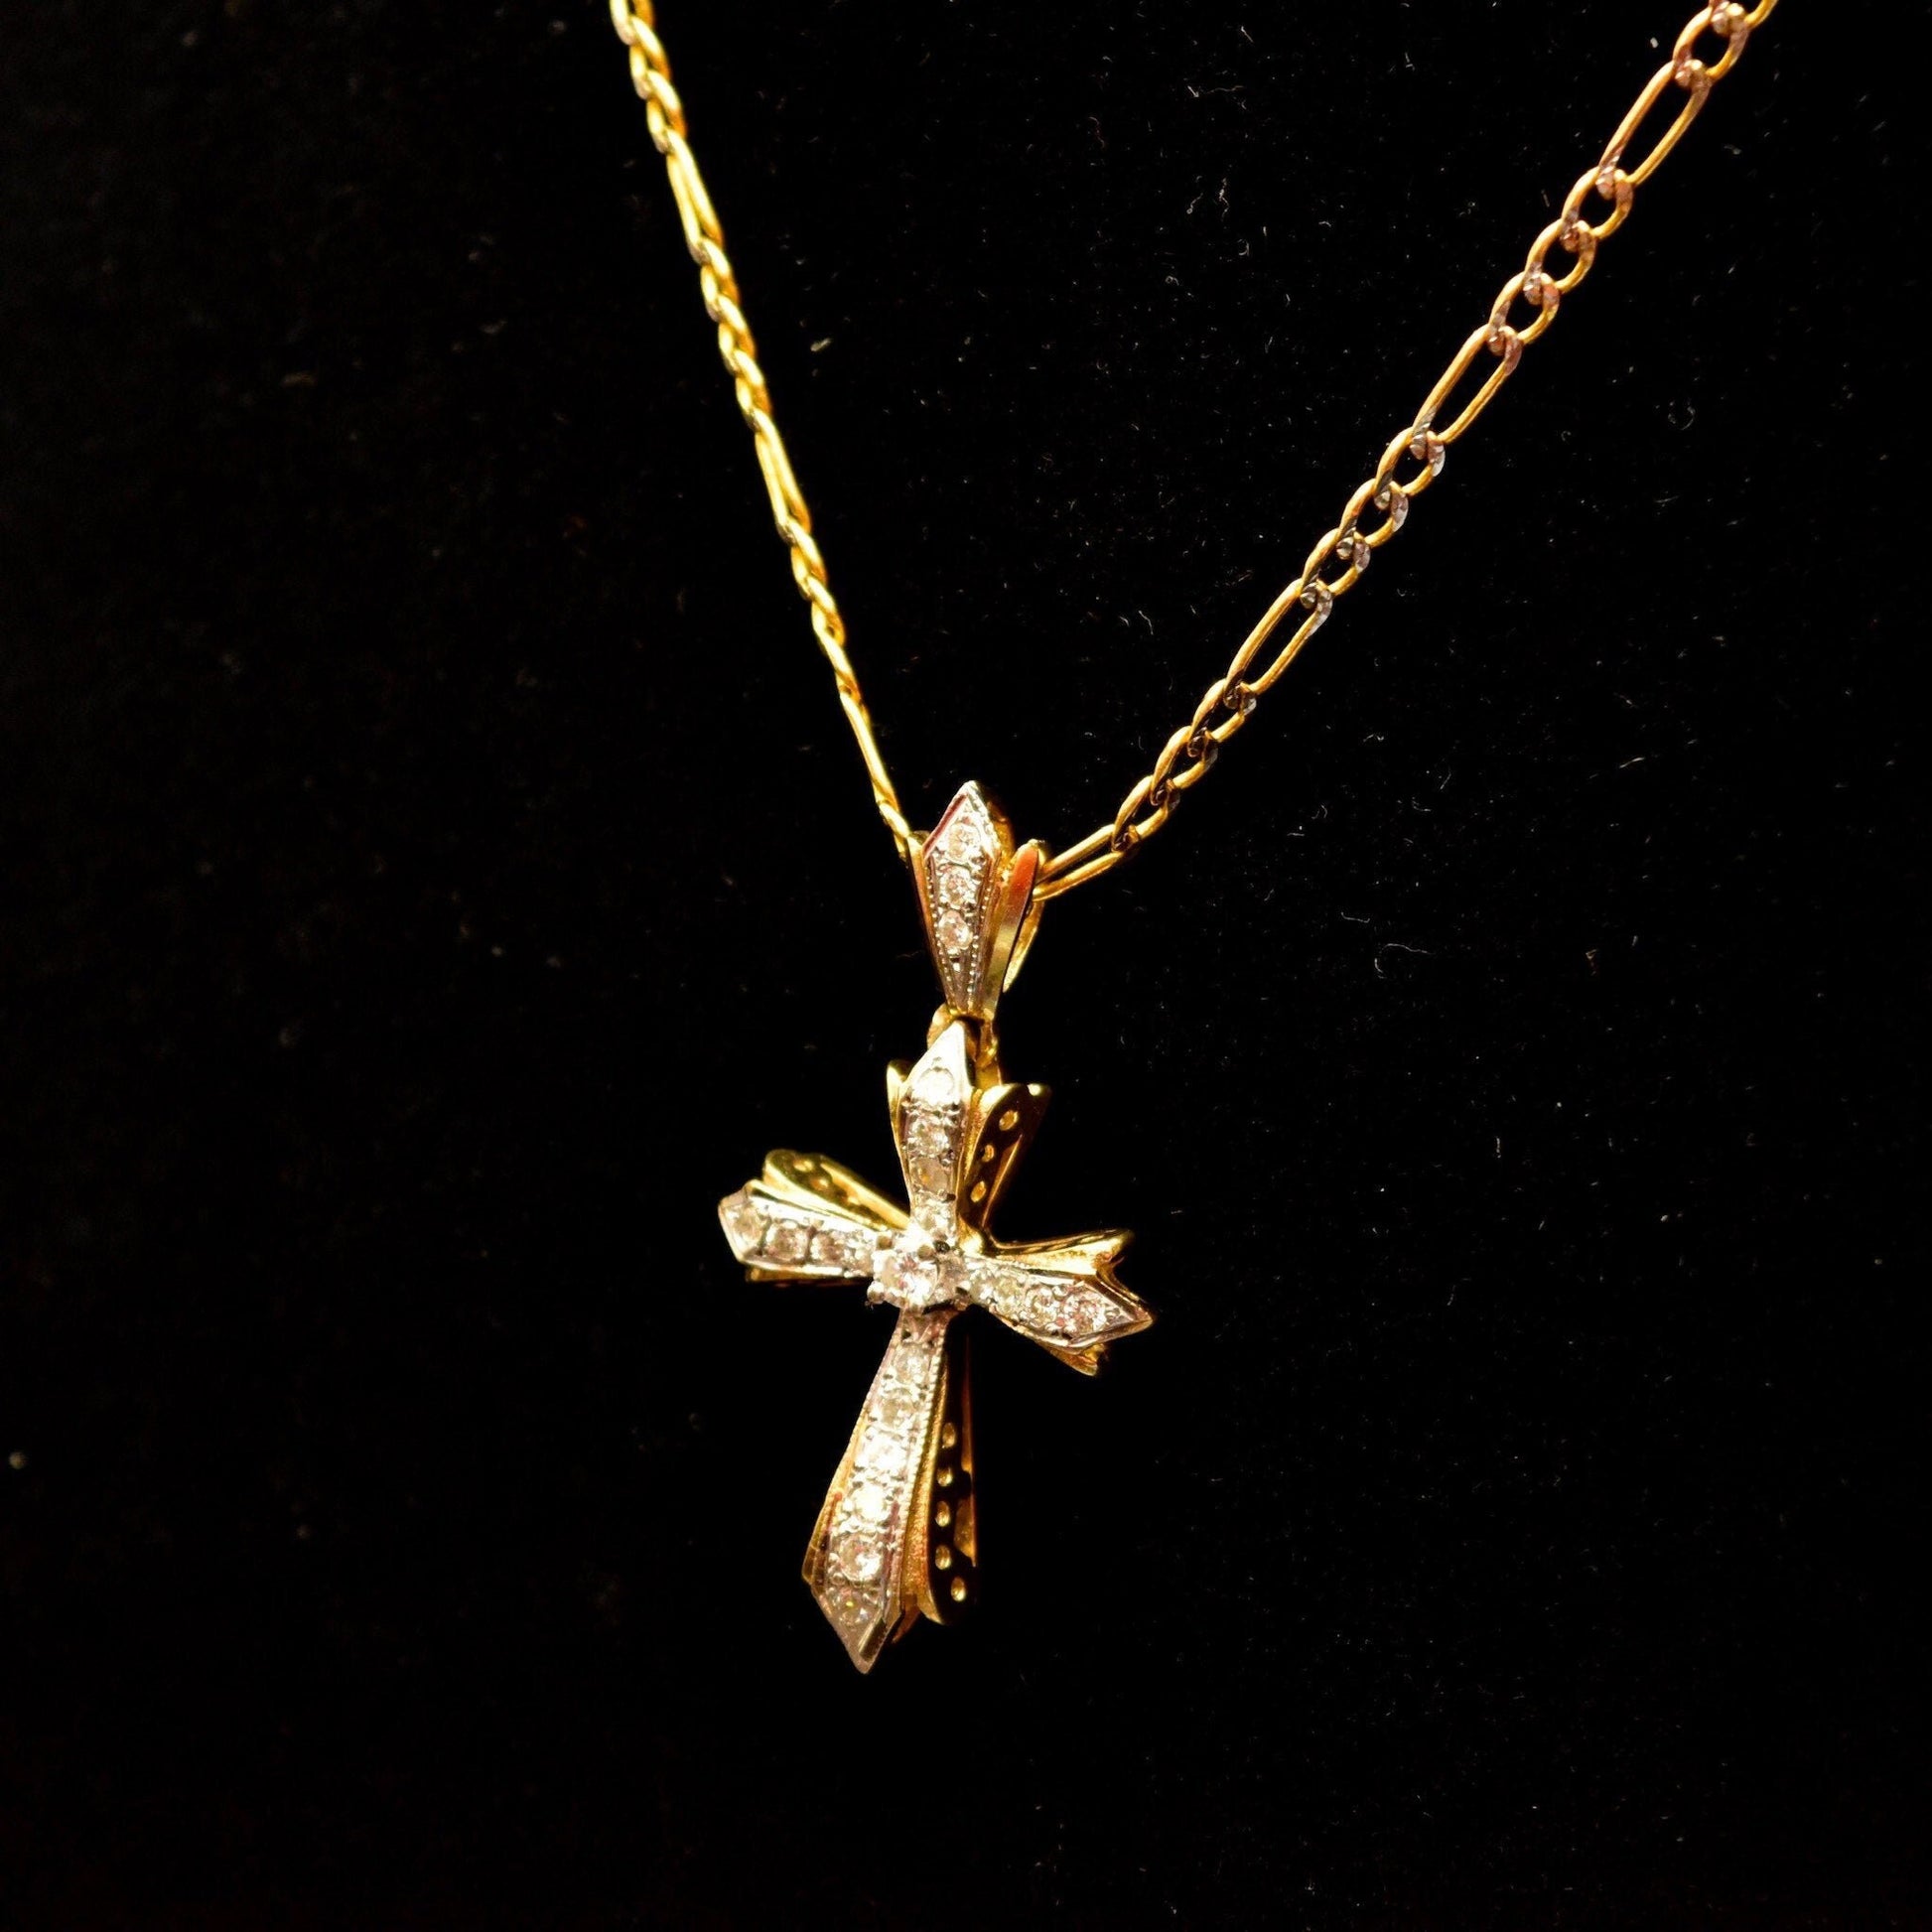 14K gold diamond-encrusted gothic cross pendant necklace with two-tone diamond cut Figaro chain, vintage religious jewelry, 16 inches long, on black background